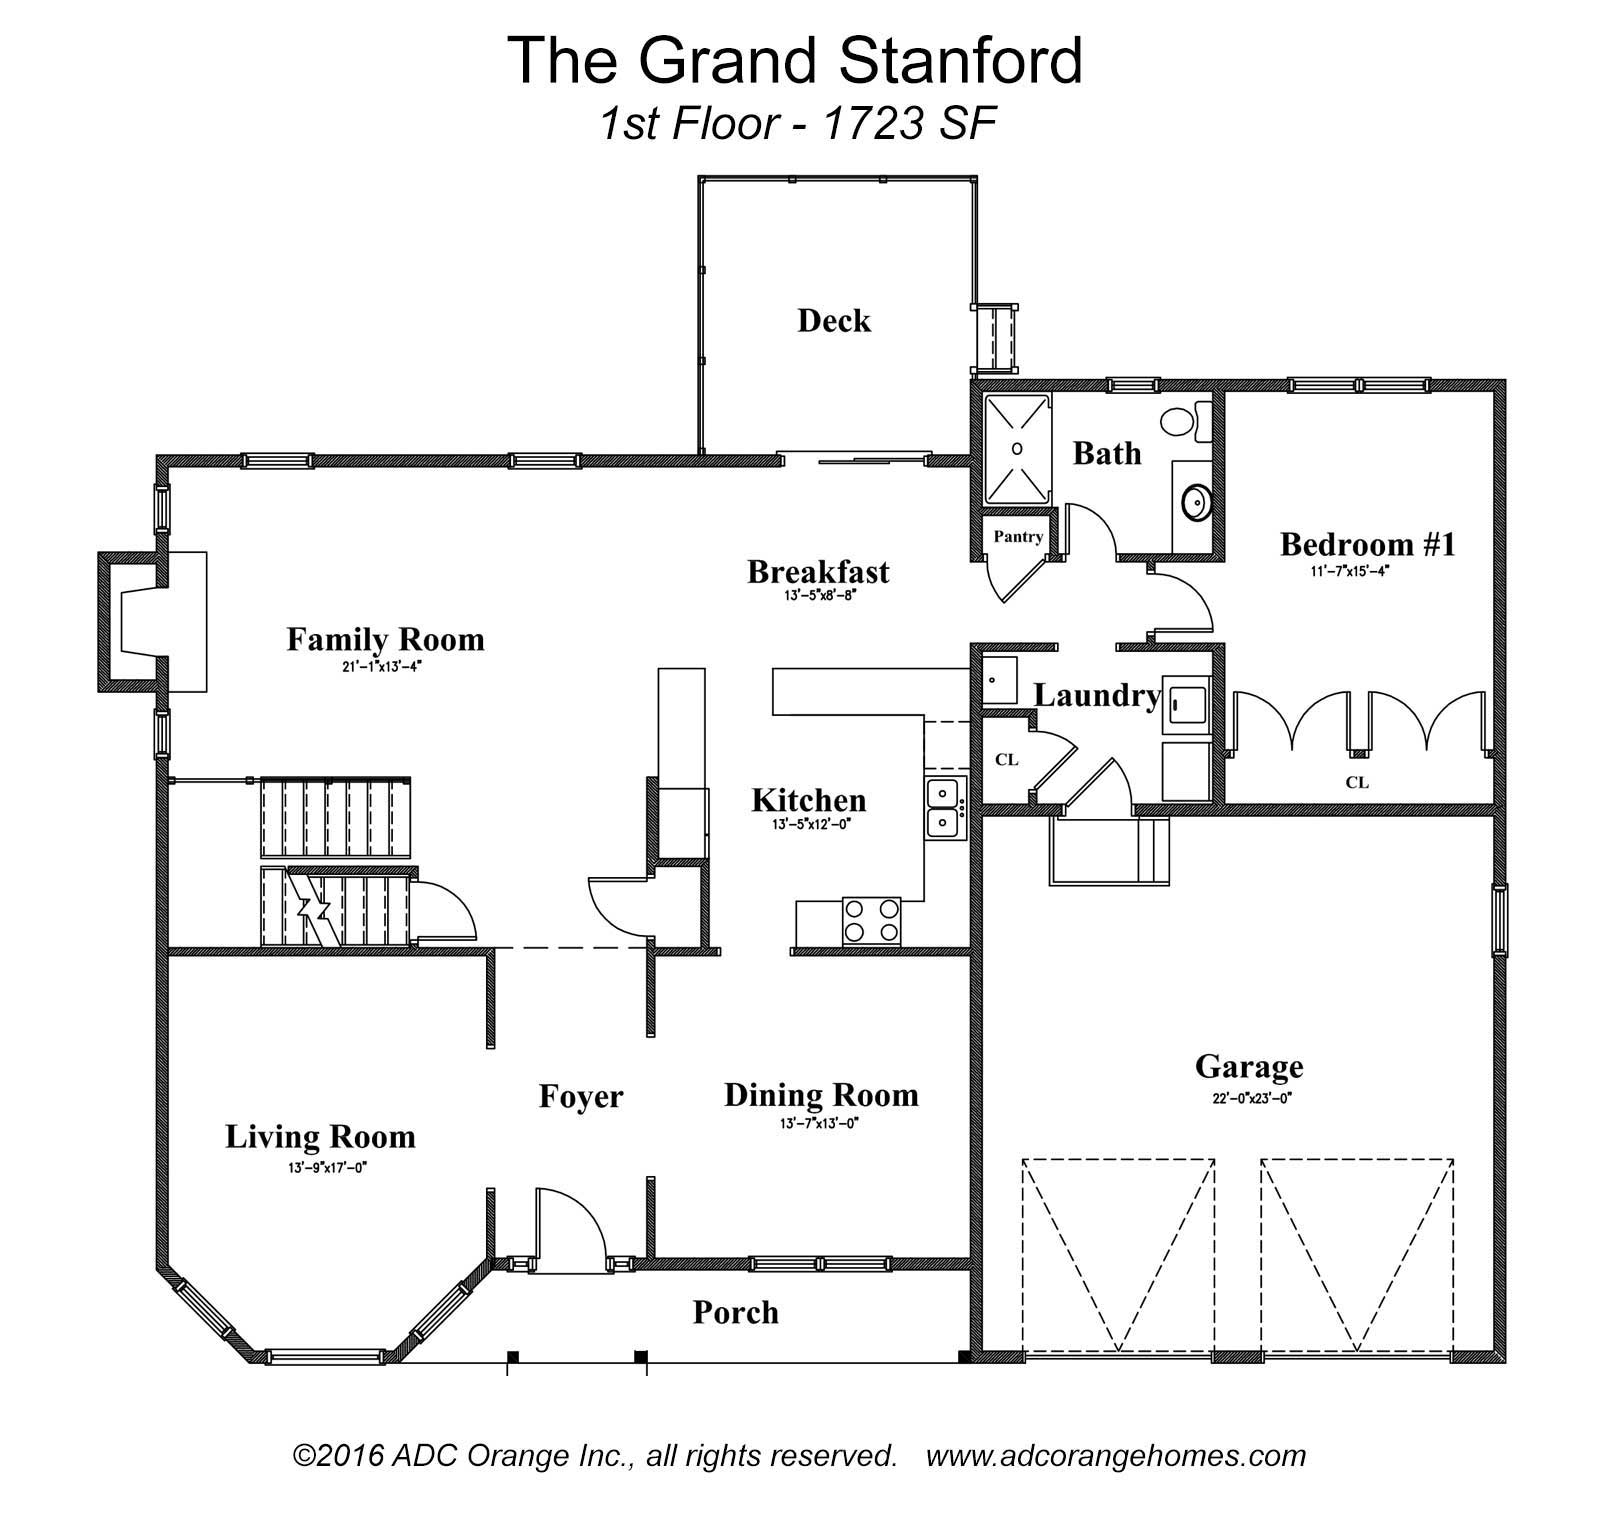 1st Floor Plan for Grand Stanford - New Home in Orange County, New York